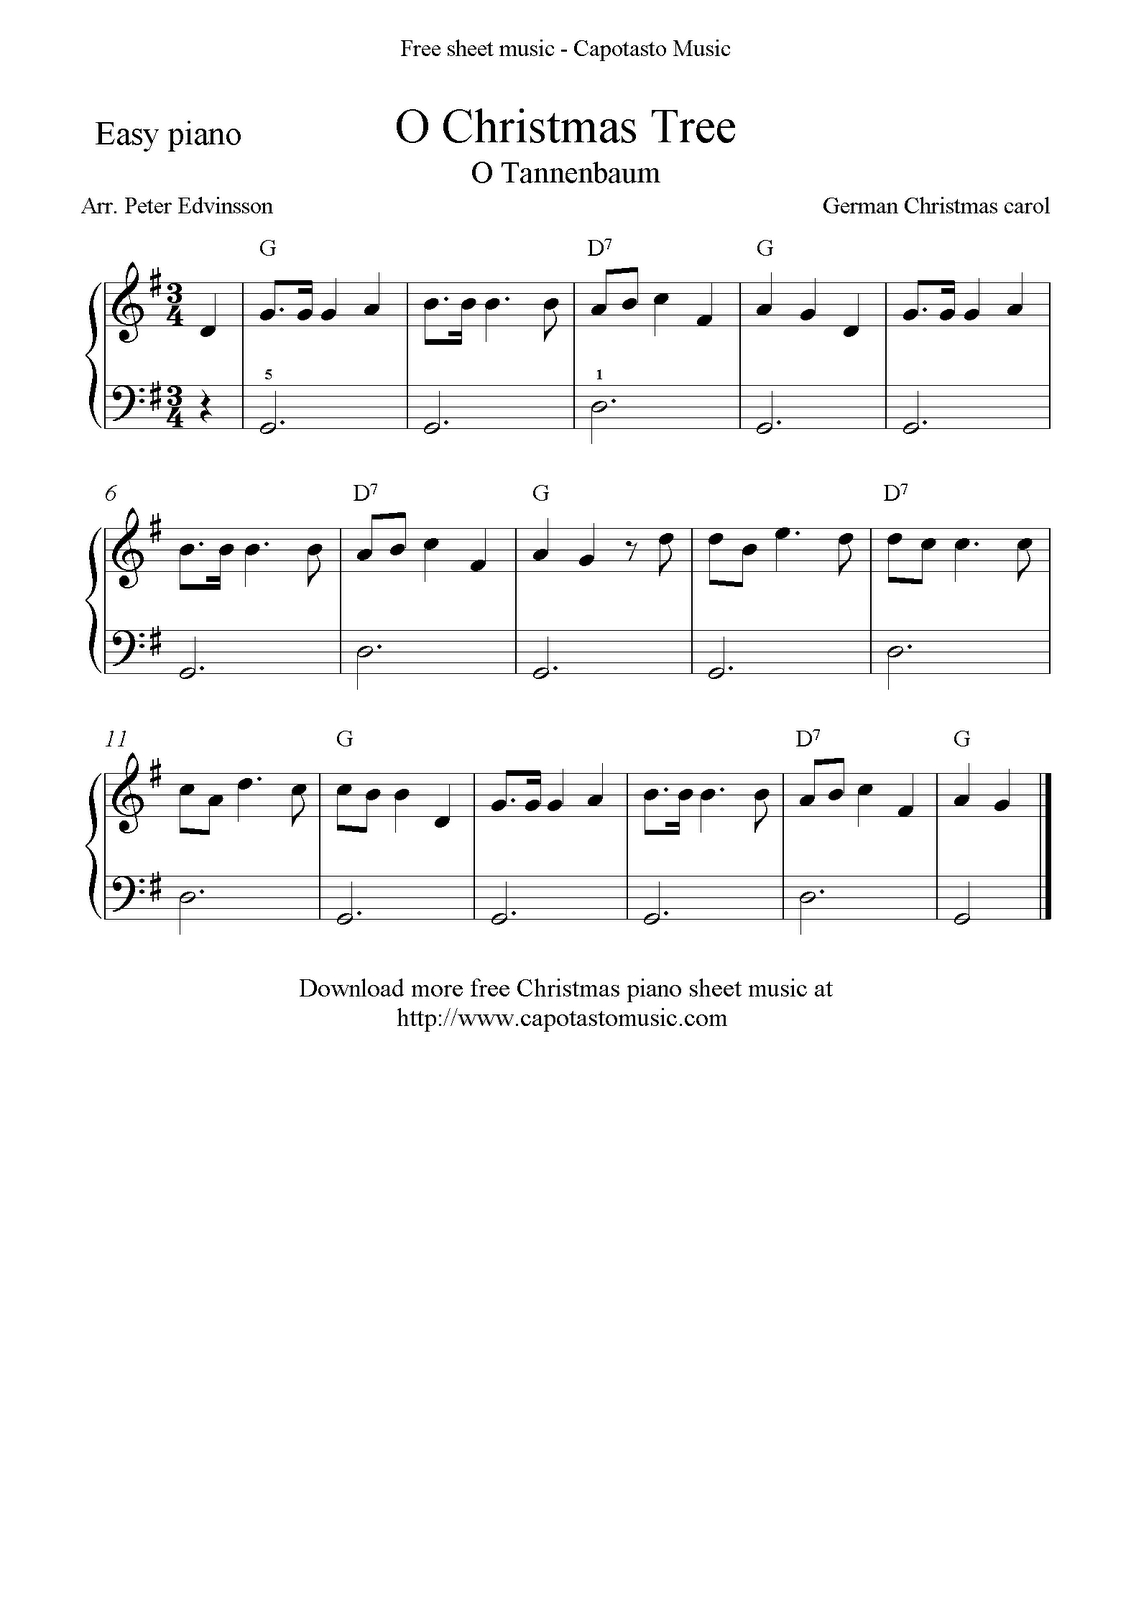 Free Christmas Sheet Music For Easy Piano Solo, O Christmas Tree - Free Christmas Piano Sheet Music For Beginners Printable